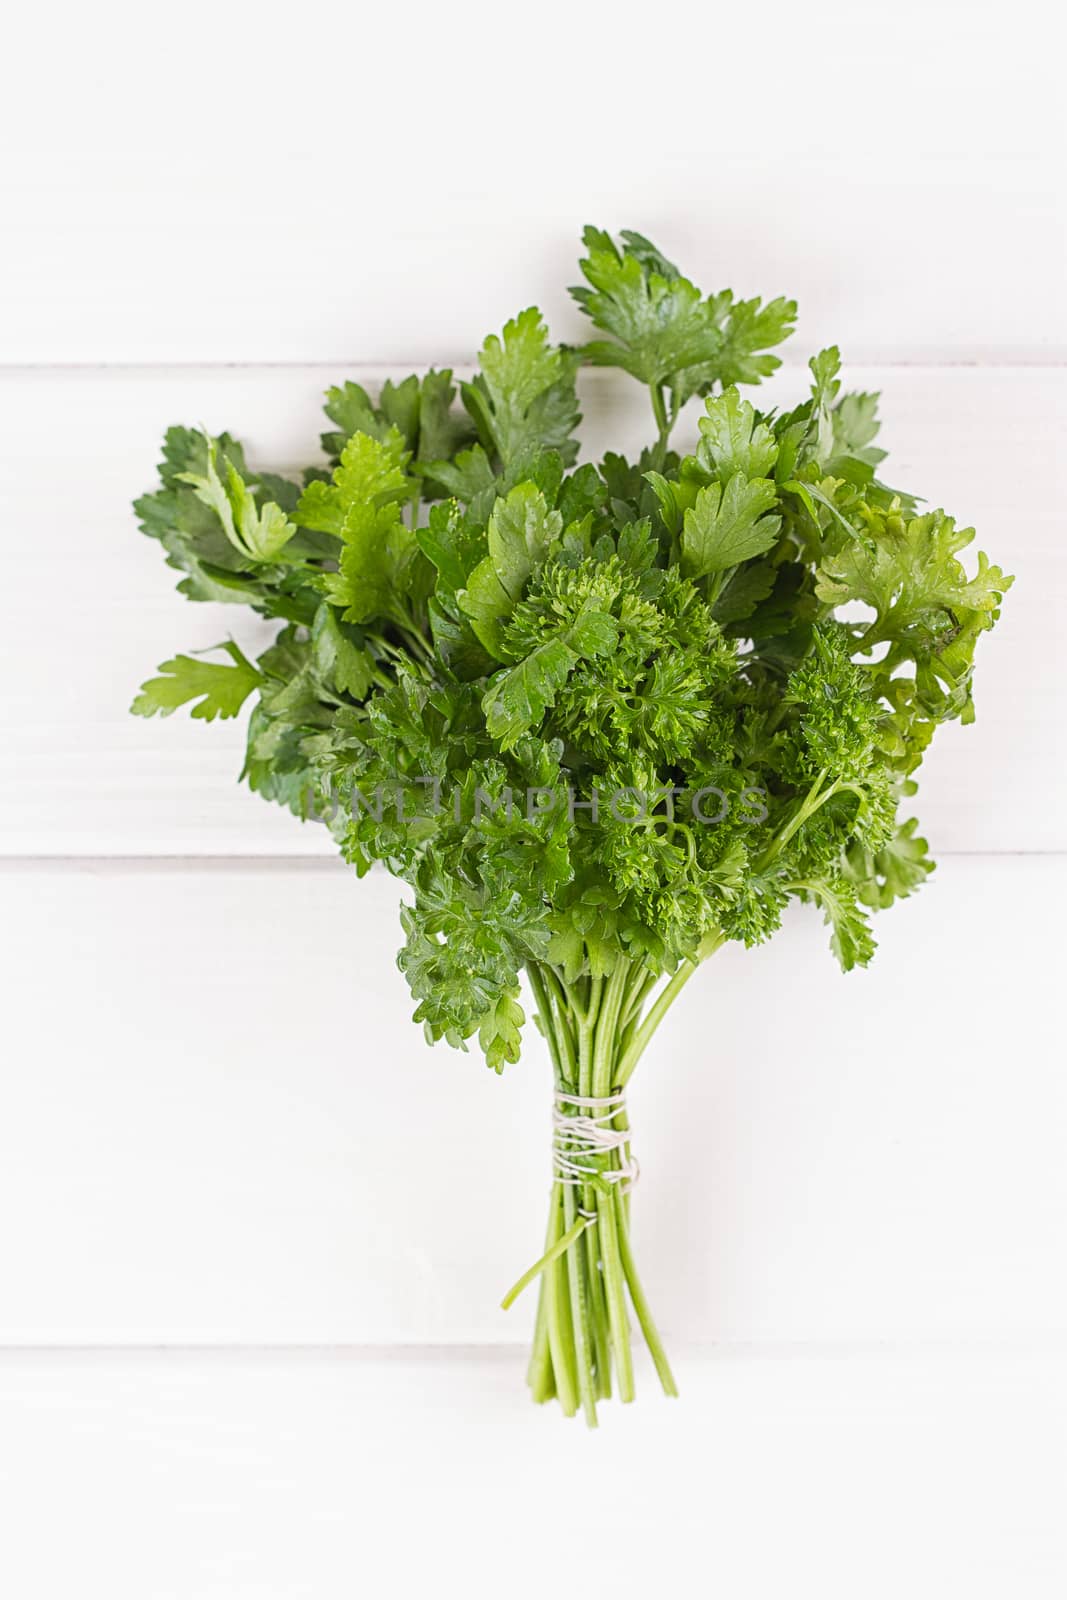 fresh parsley and dill by victosha